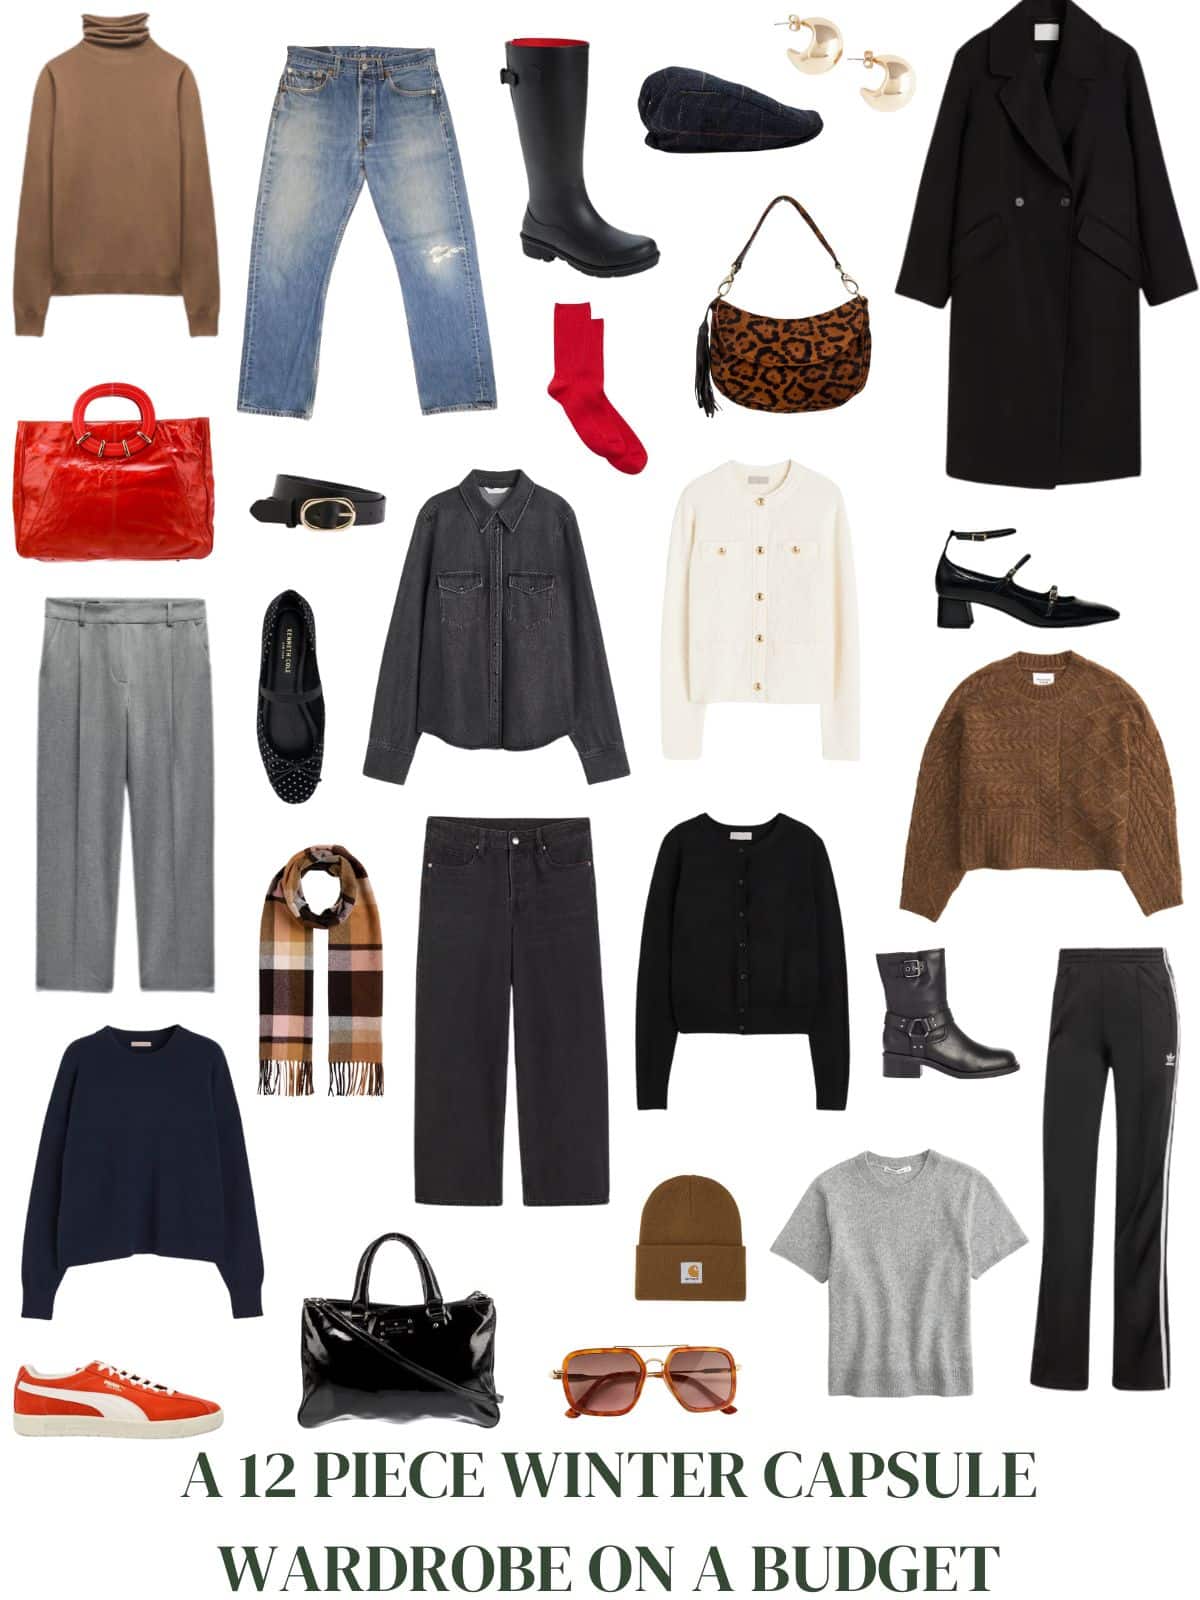 A white background with 12 pieces and accessories for A 12 Piece Winter Capsule Wardrobe on a Budget.